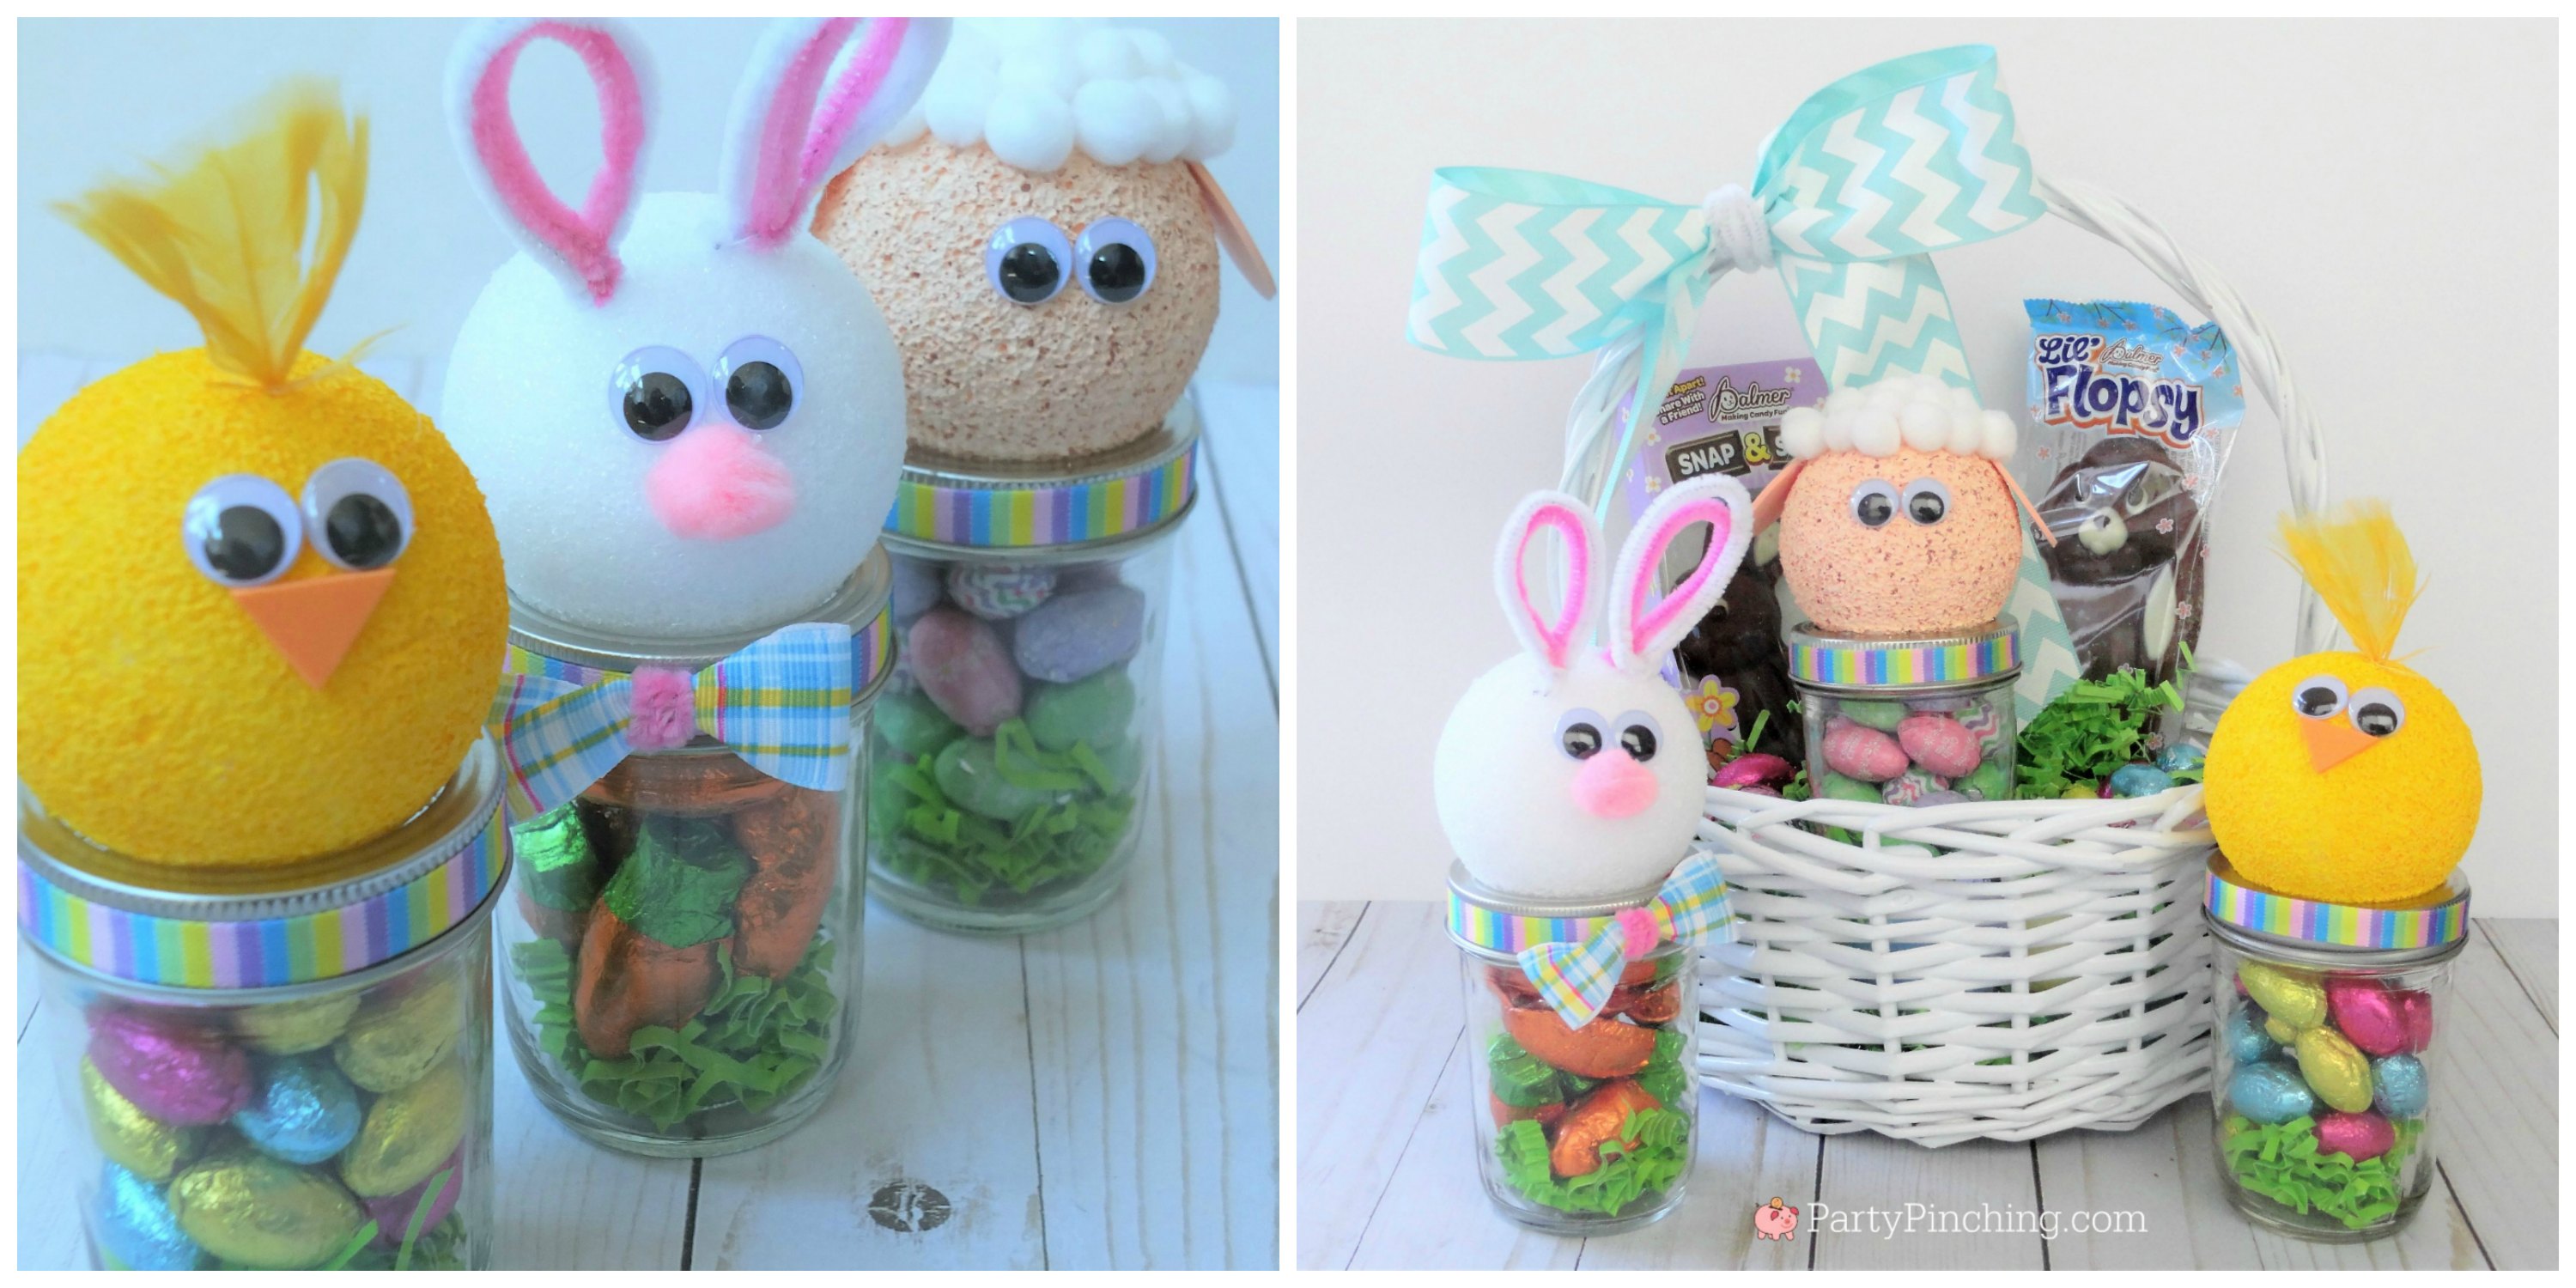 Miniature Candy Jars VERY Small Jars With Cork Tops and Artificial Candy  Easter Decorations Tiered Tray Easter Easter Tray Ideas 